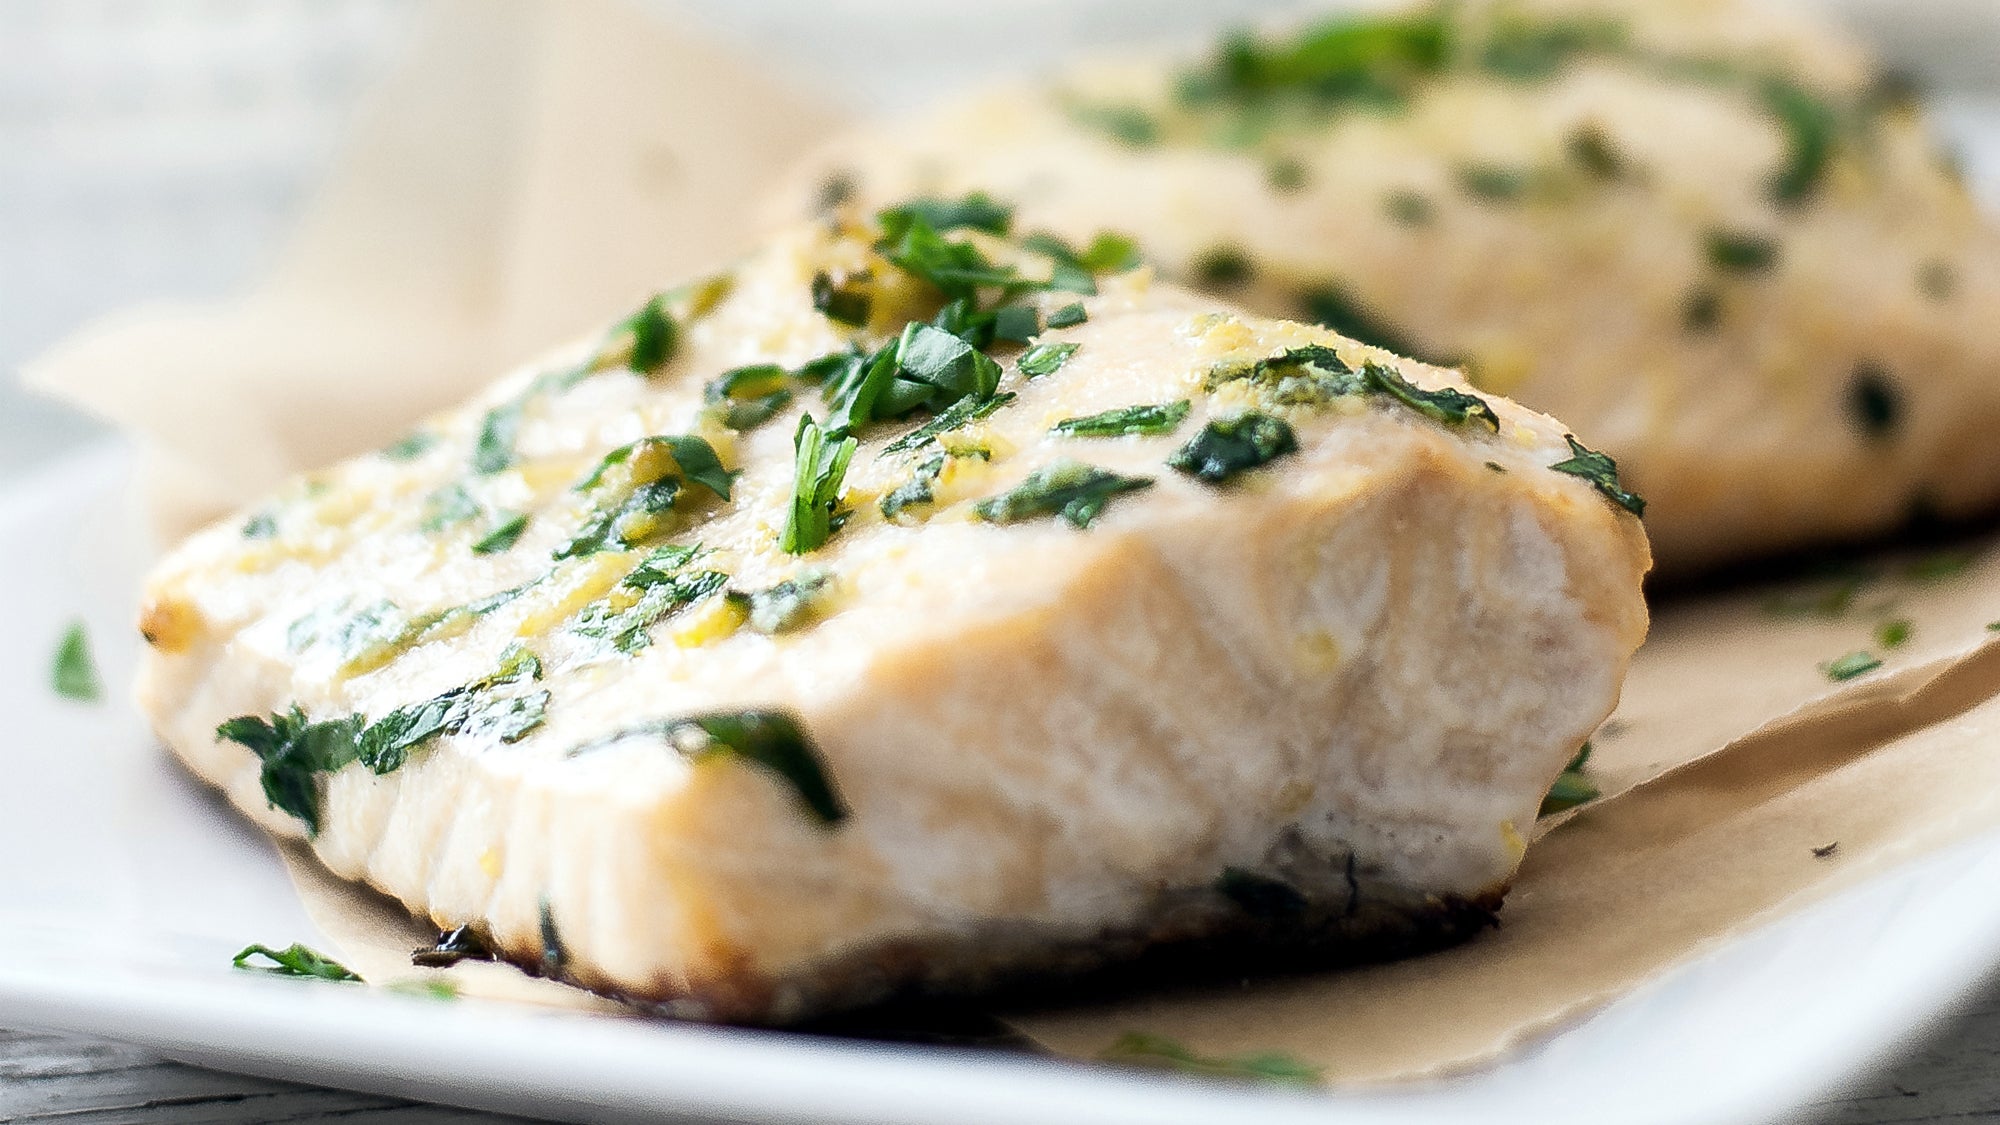 Easiest baked halibut recipe